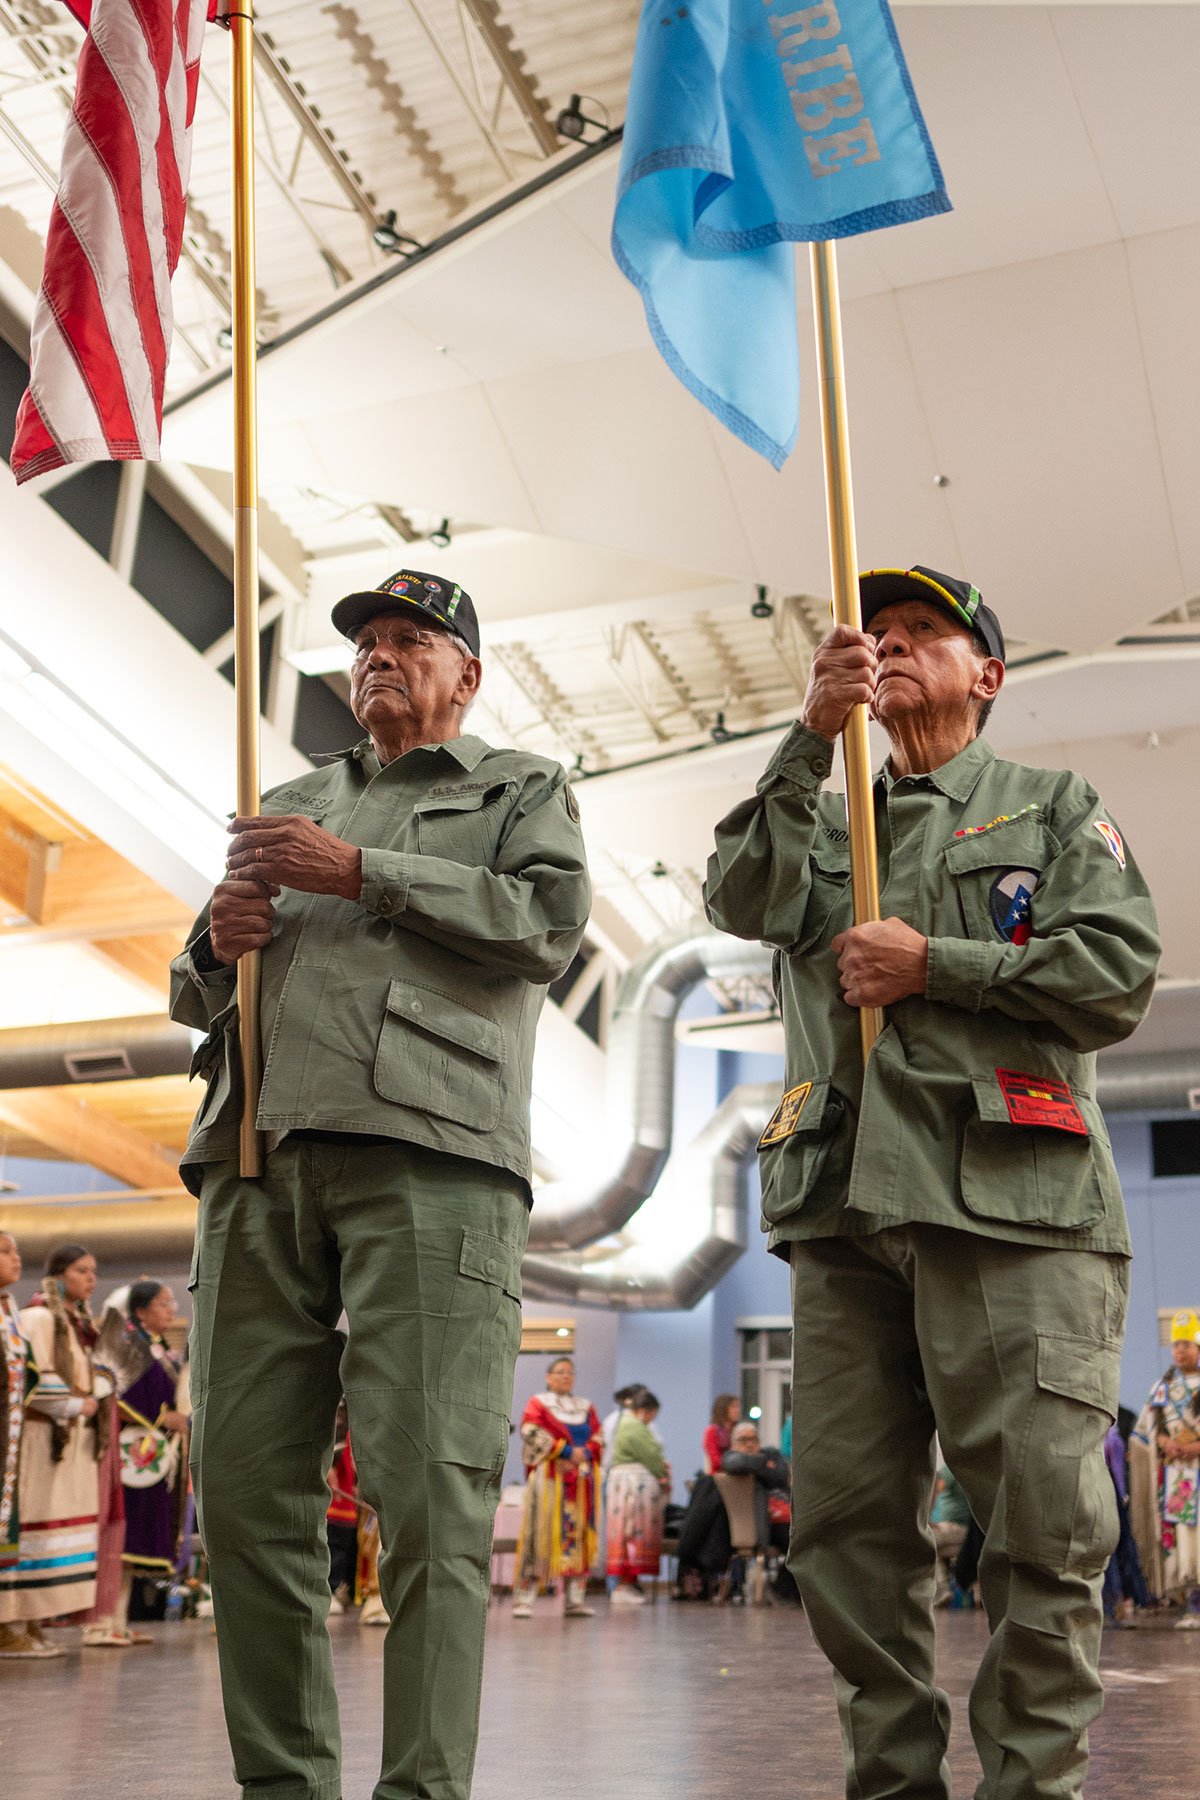 Southern Ute Veterans Association members Howard Richards Sr. and Rod Grove bring in the colors during Grand Entry of the MPF Valentine’s Powwow.